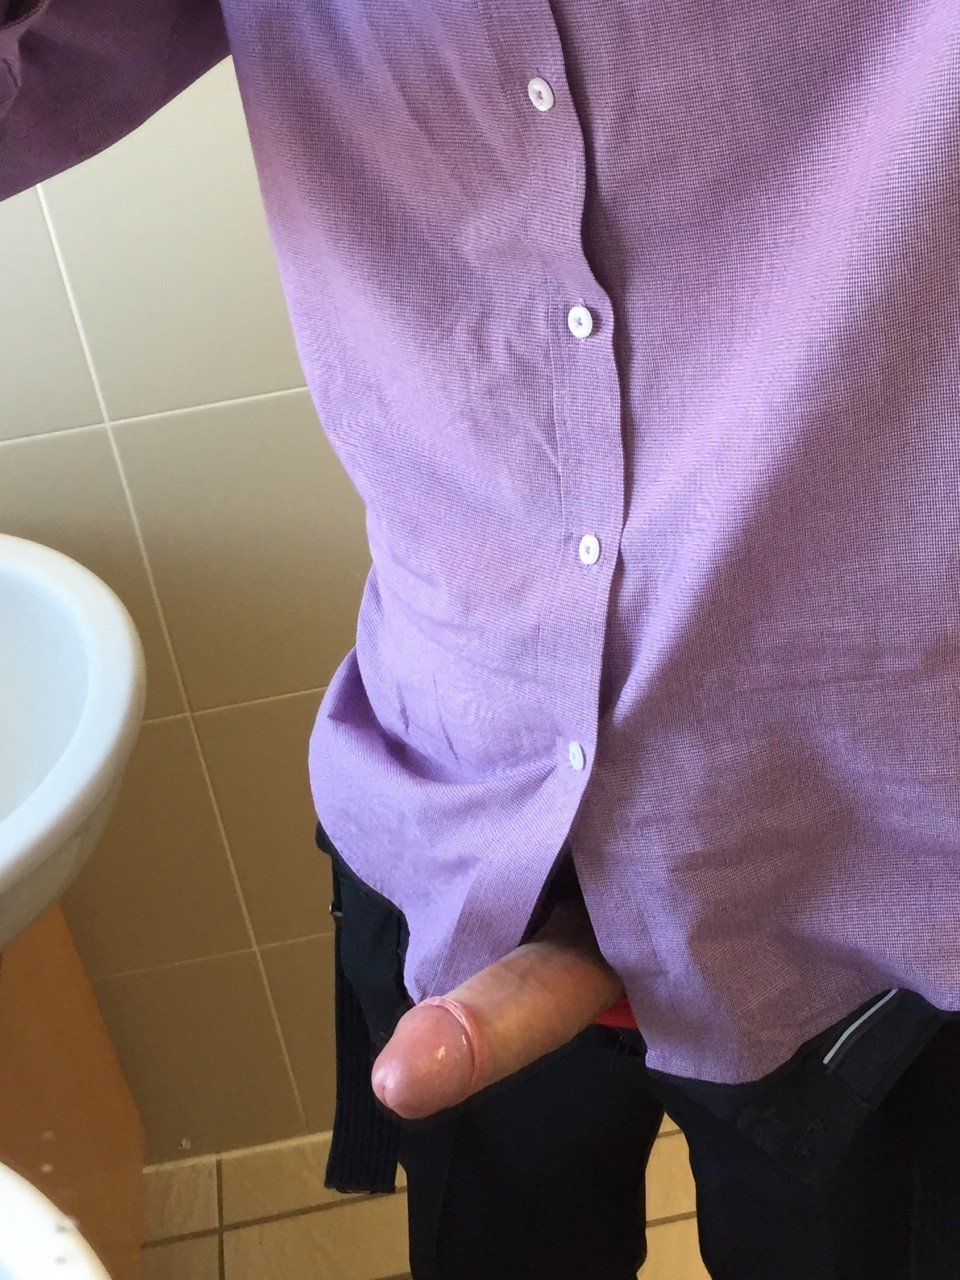 Photo by scotty9 with the username @scotty9,  September 5, 2017 at 2:27 PM and the text says 'hardcocknow:#pubes #balls #hardcock #uncutcock #foreskin #foreskinforward #foreskinback #bellend'